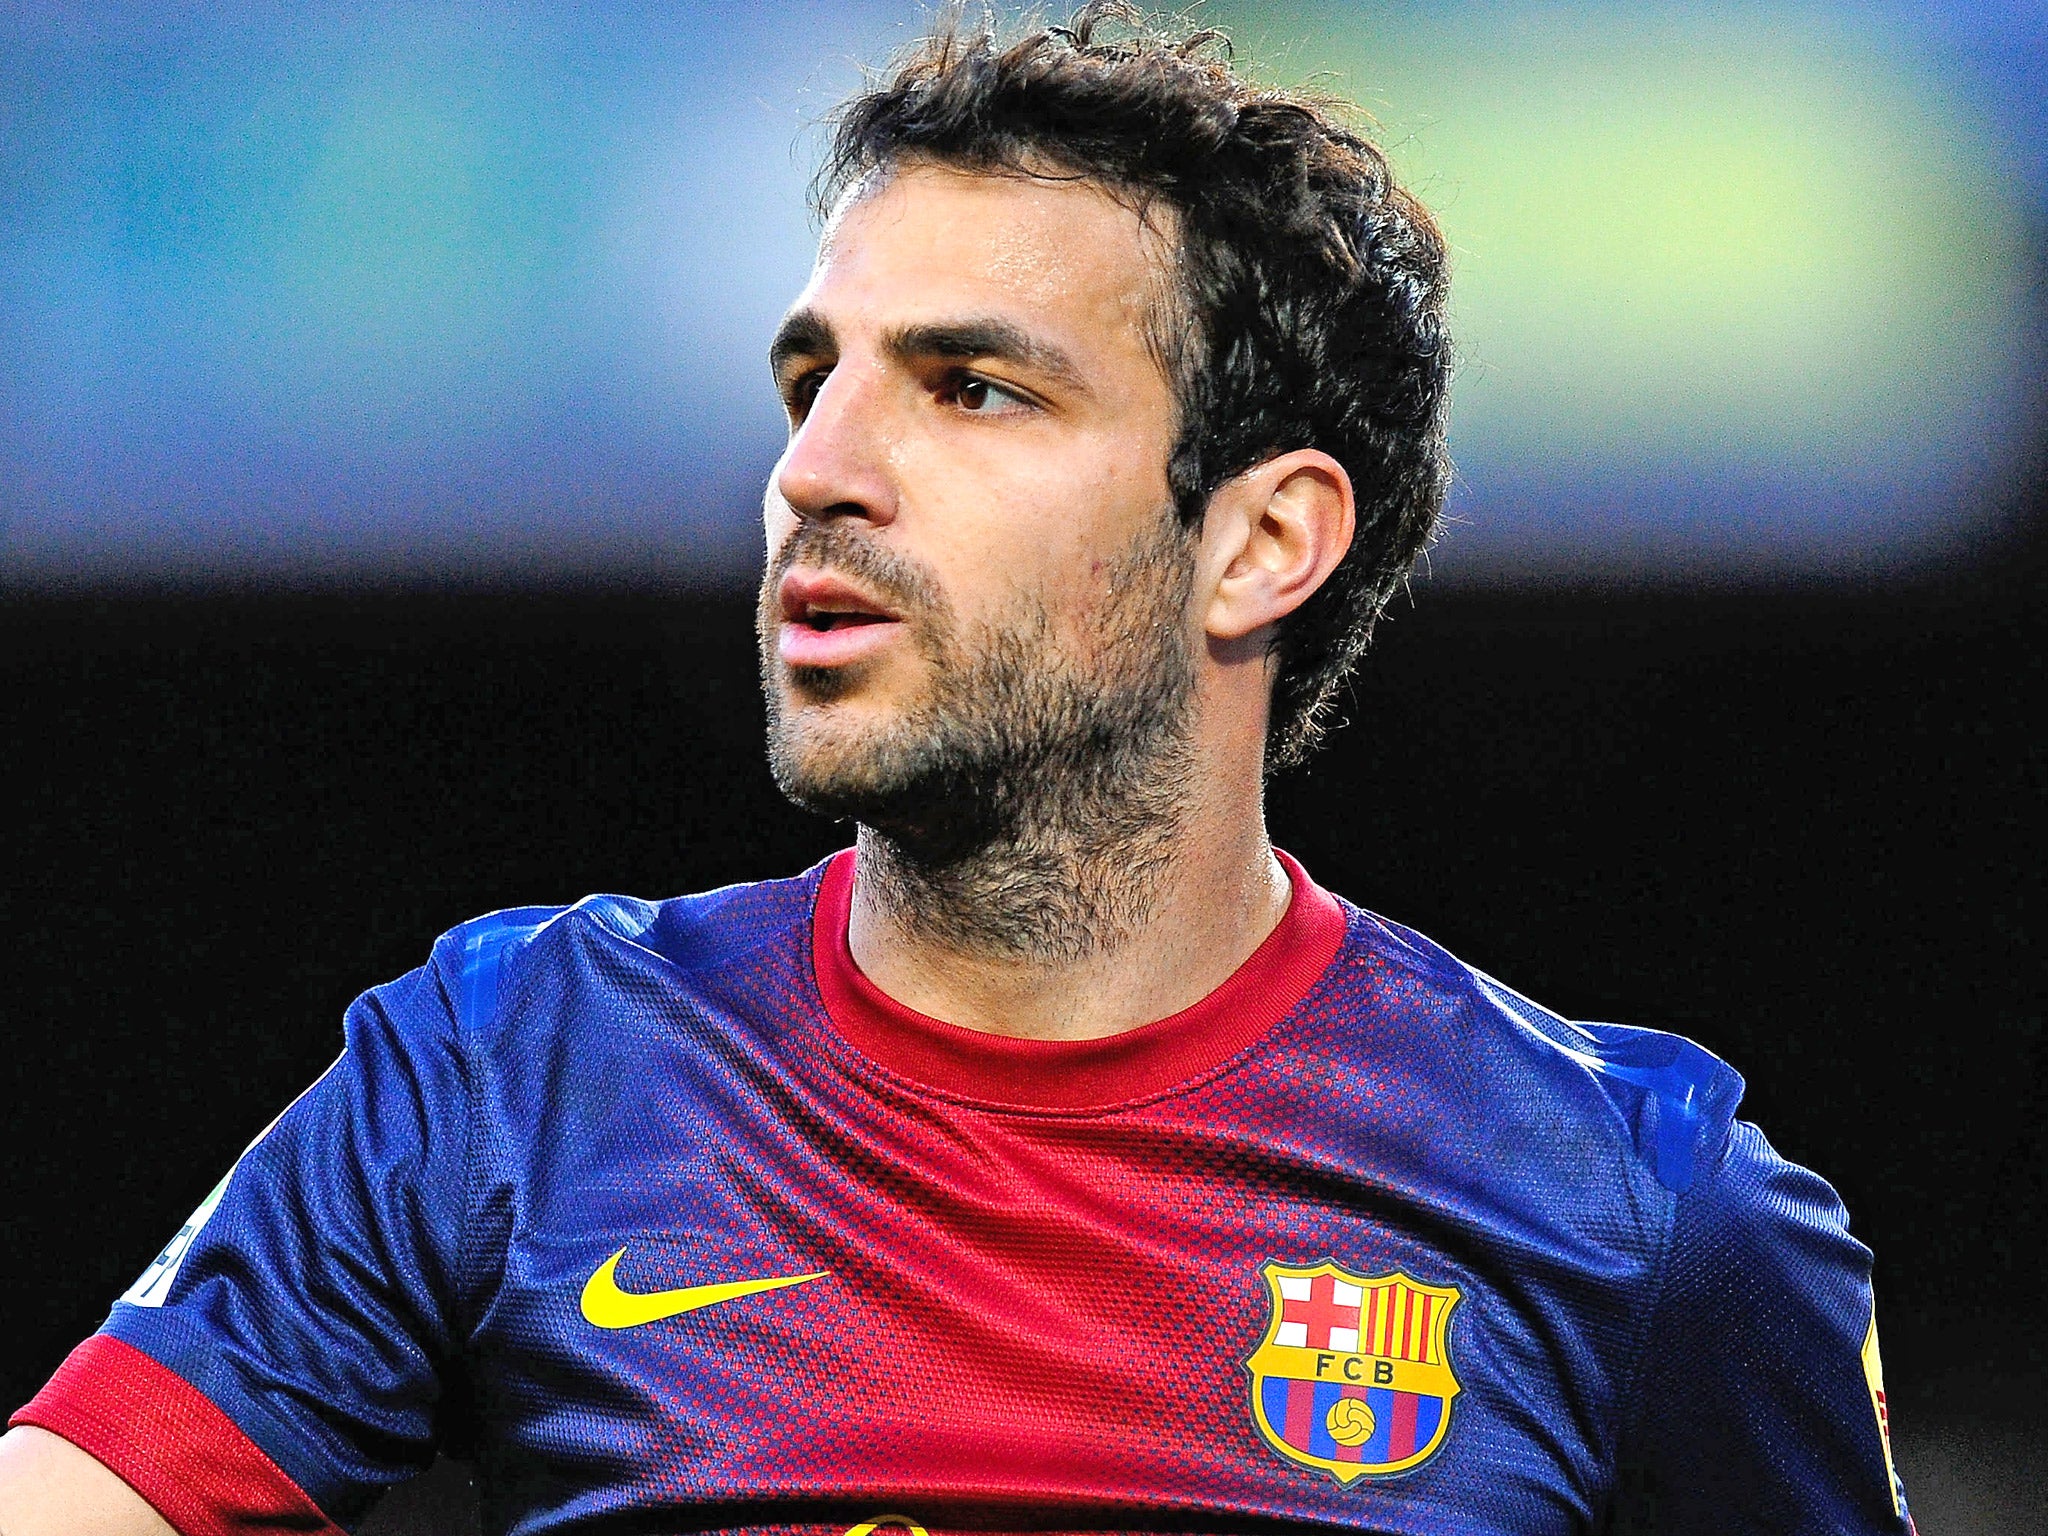 Fabregas: 'What I truly want is to triumph at Barcelona'